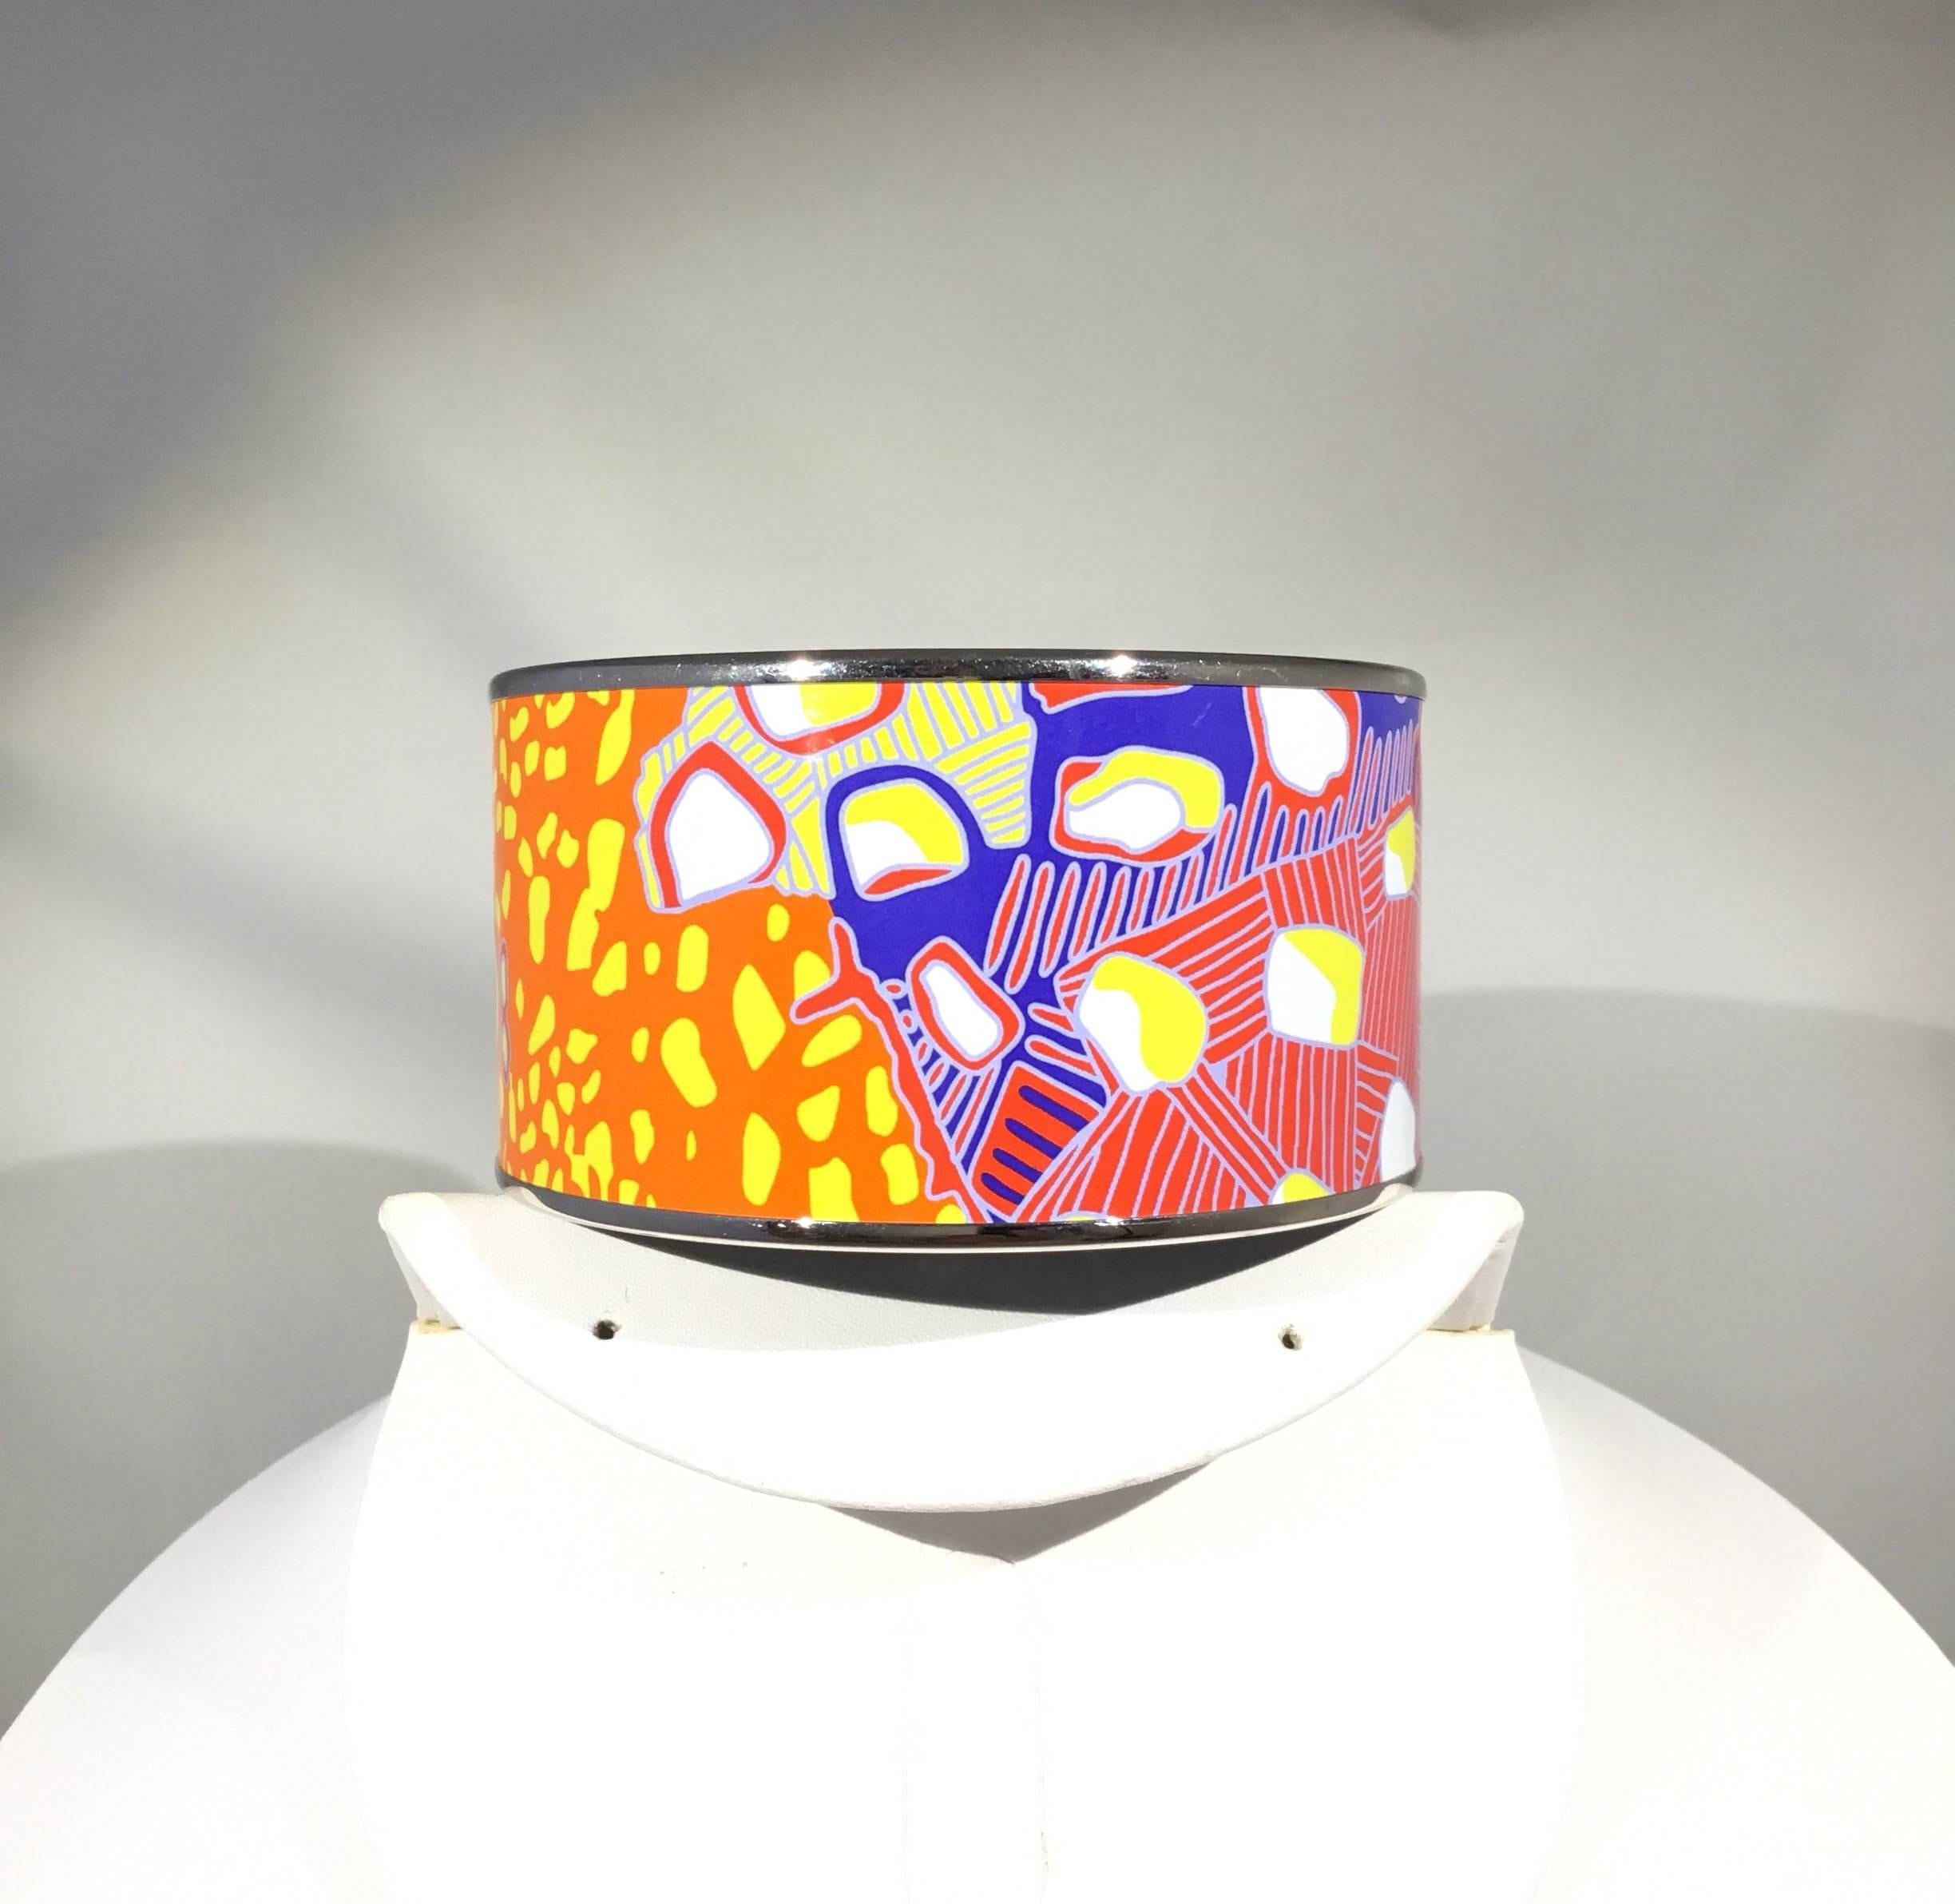 Hermes enamel bangle features a bright print with silver hardware. Made in France + O. Diameter 2.5 inches, width 1.5”